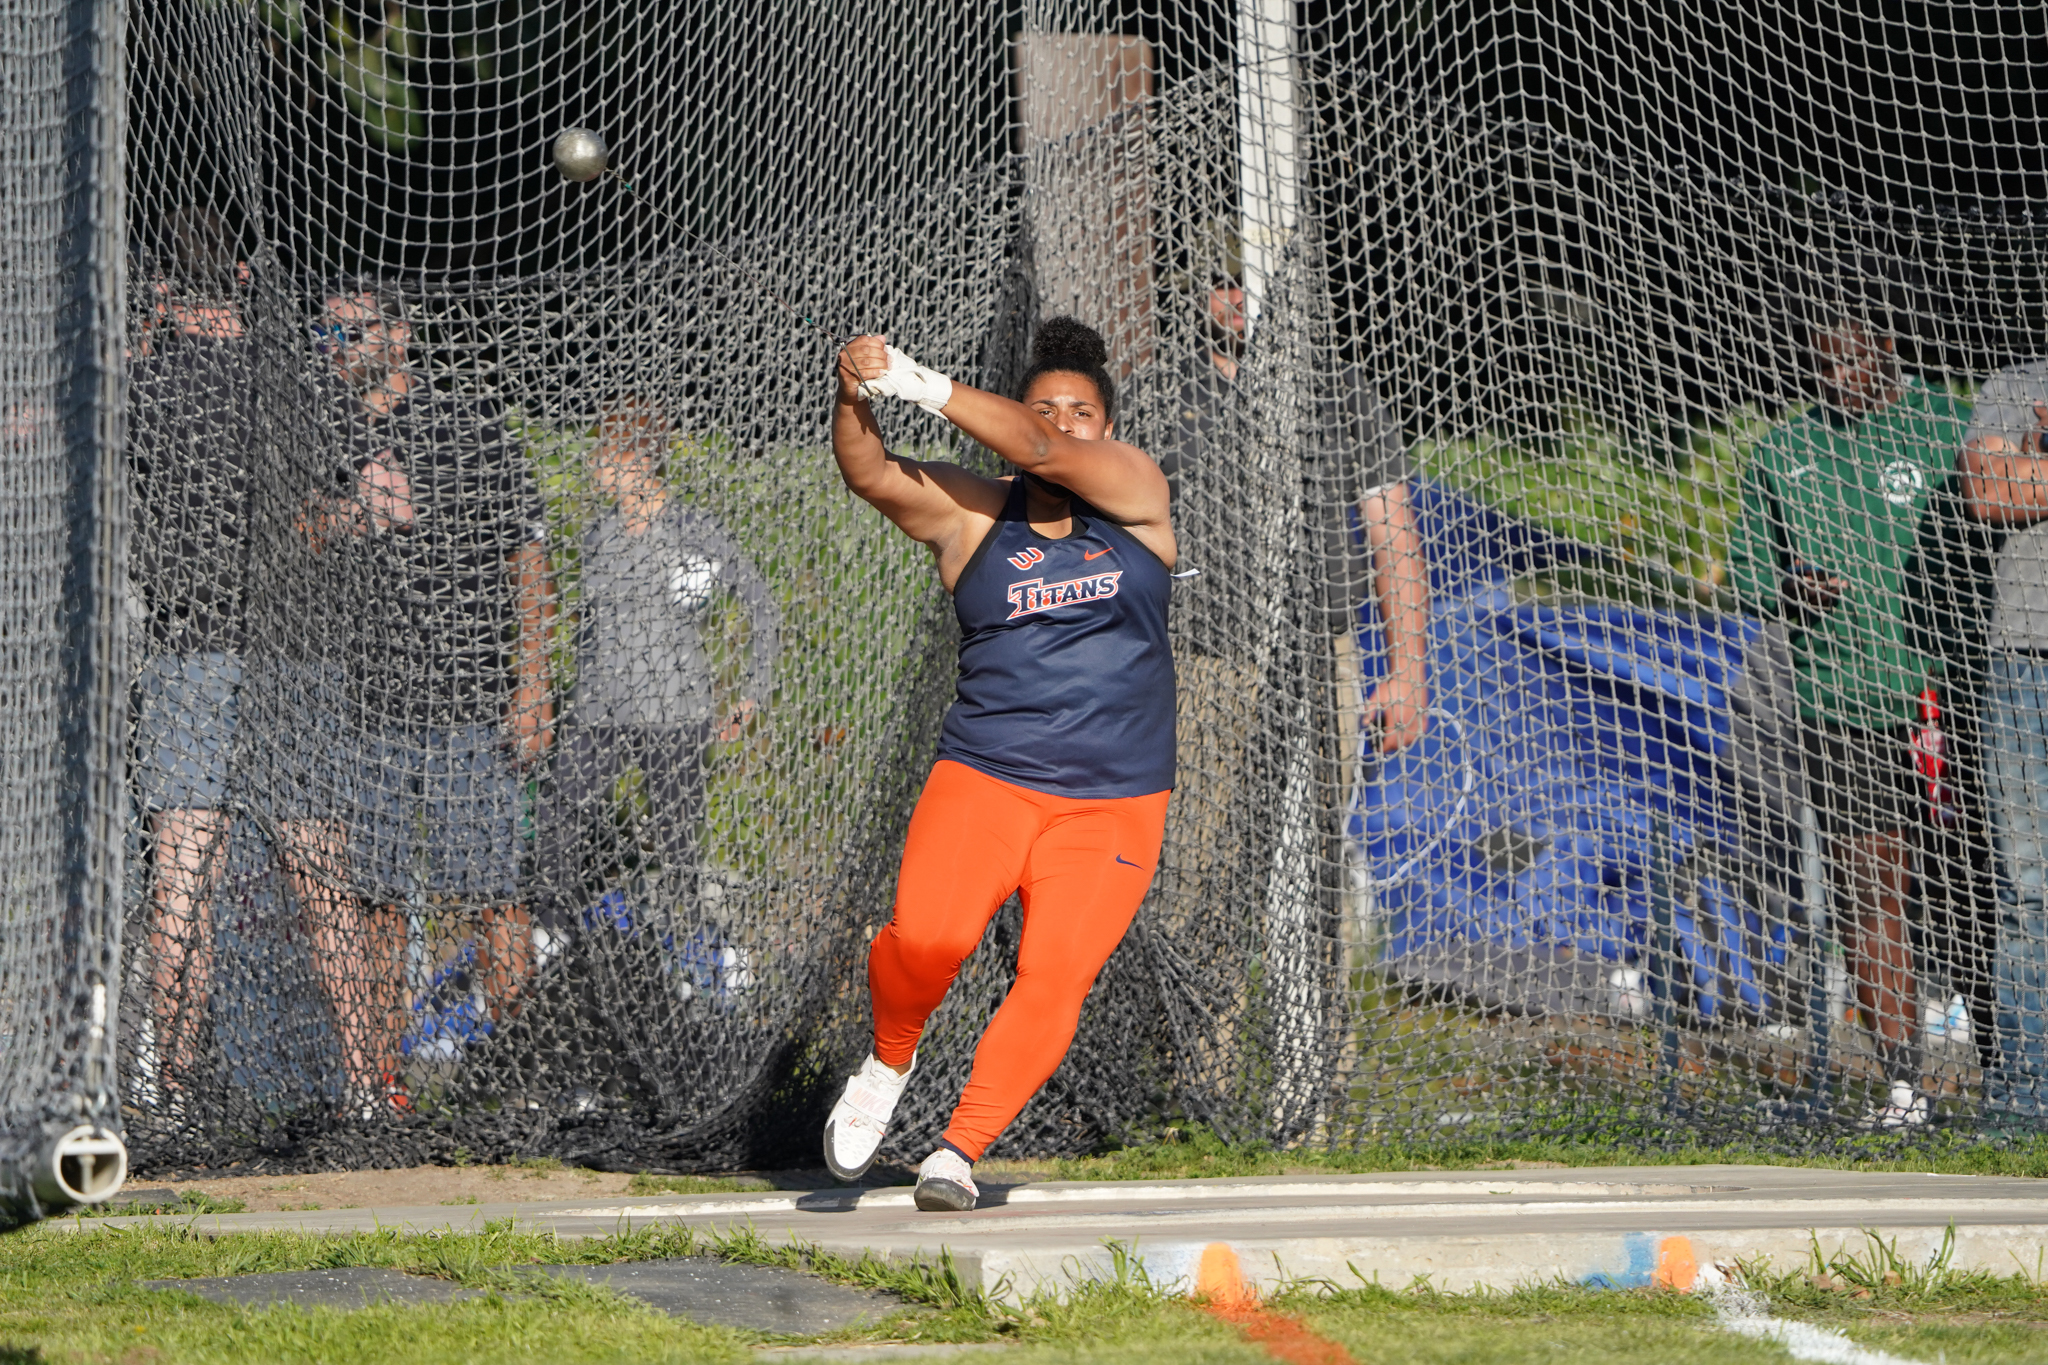 Kyliegh Wilkerson throwing Hammer in competition. Photo by Jayce Smith.